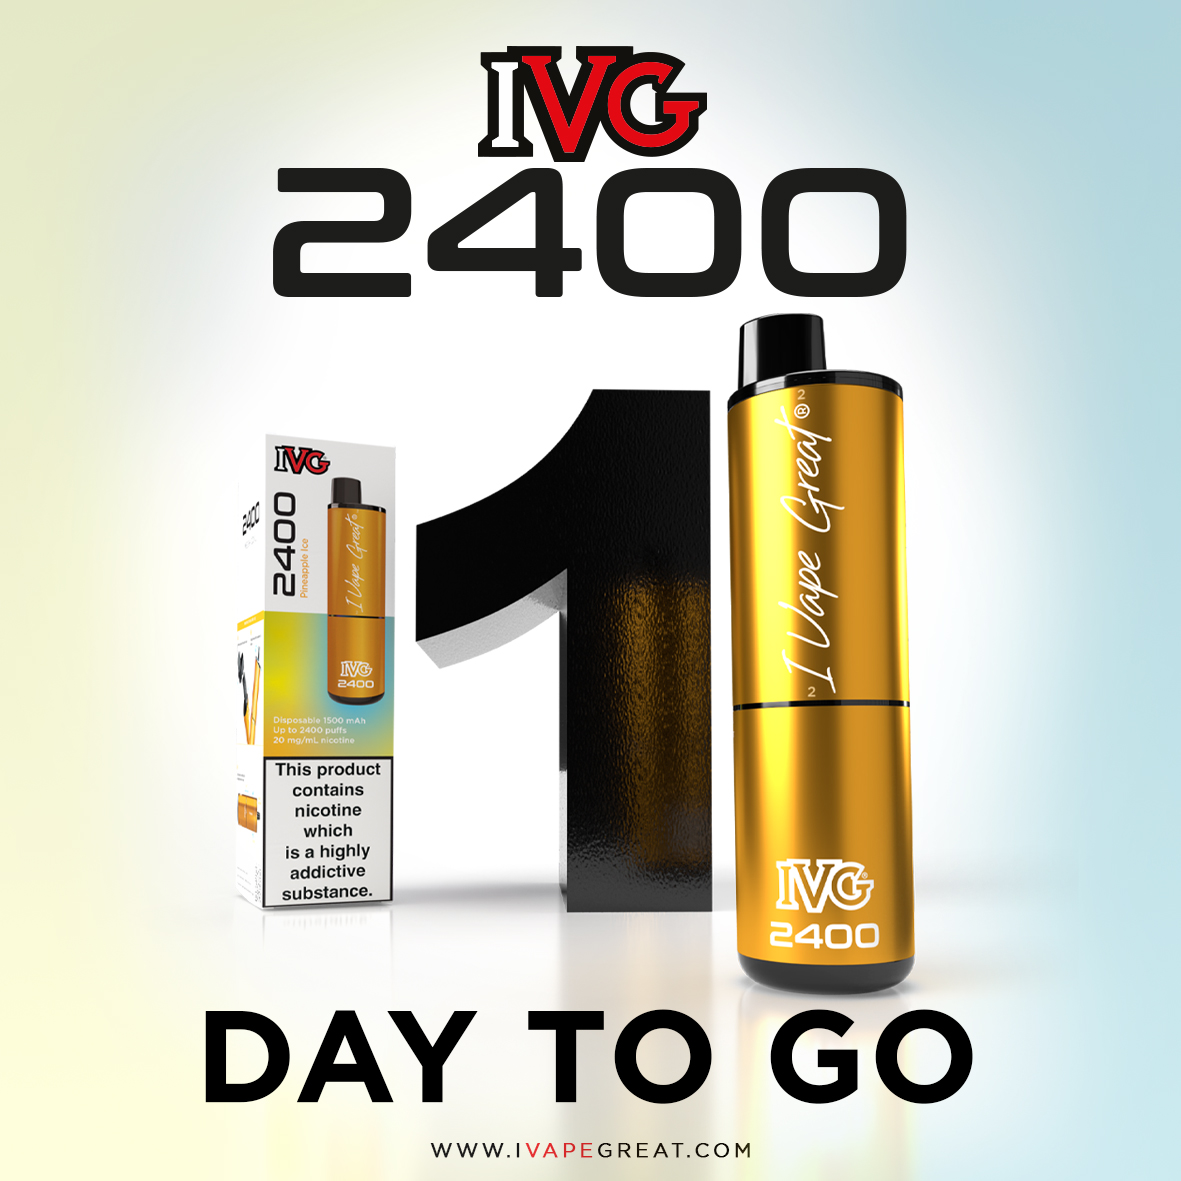 Tomorrow, IVG change the game.
Big Puffs, Big Savings and Total Convenience.

#ivapegreat #newproduct #comingsoon #IVG2400 #newrelease #vapeuk